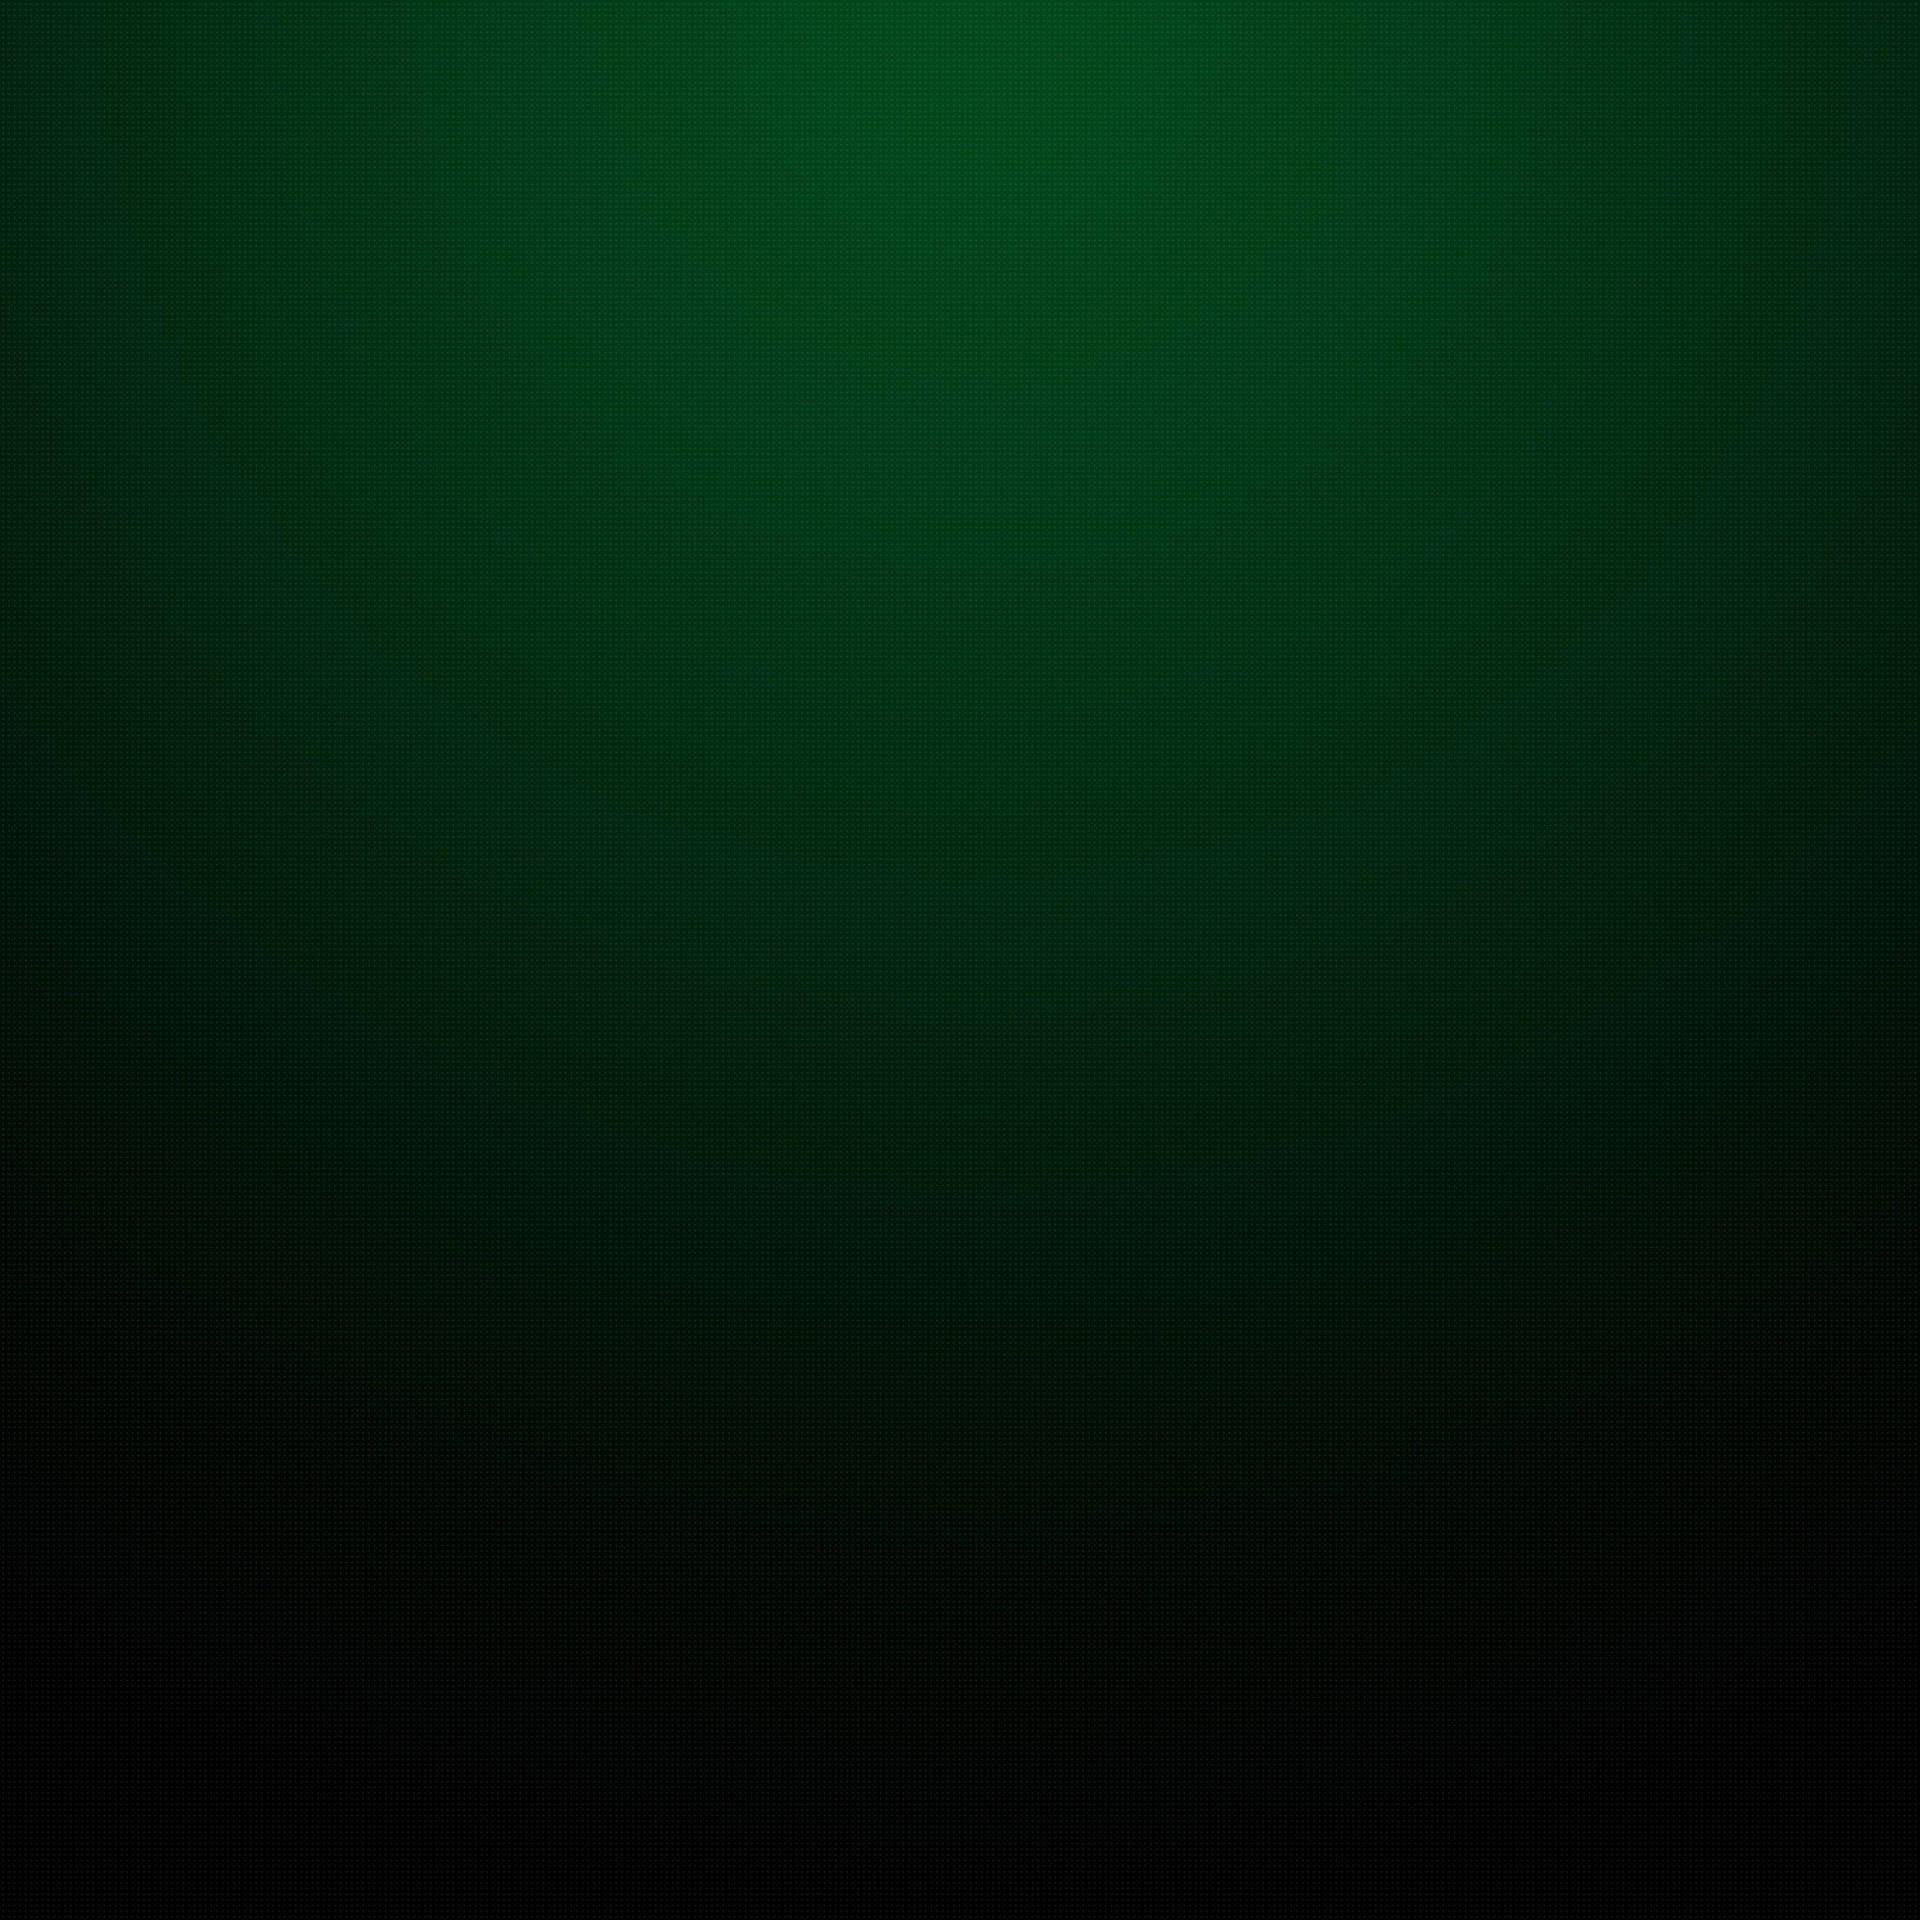 Dark Green 2048X2048 Wallpaper and Background Image